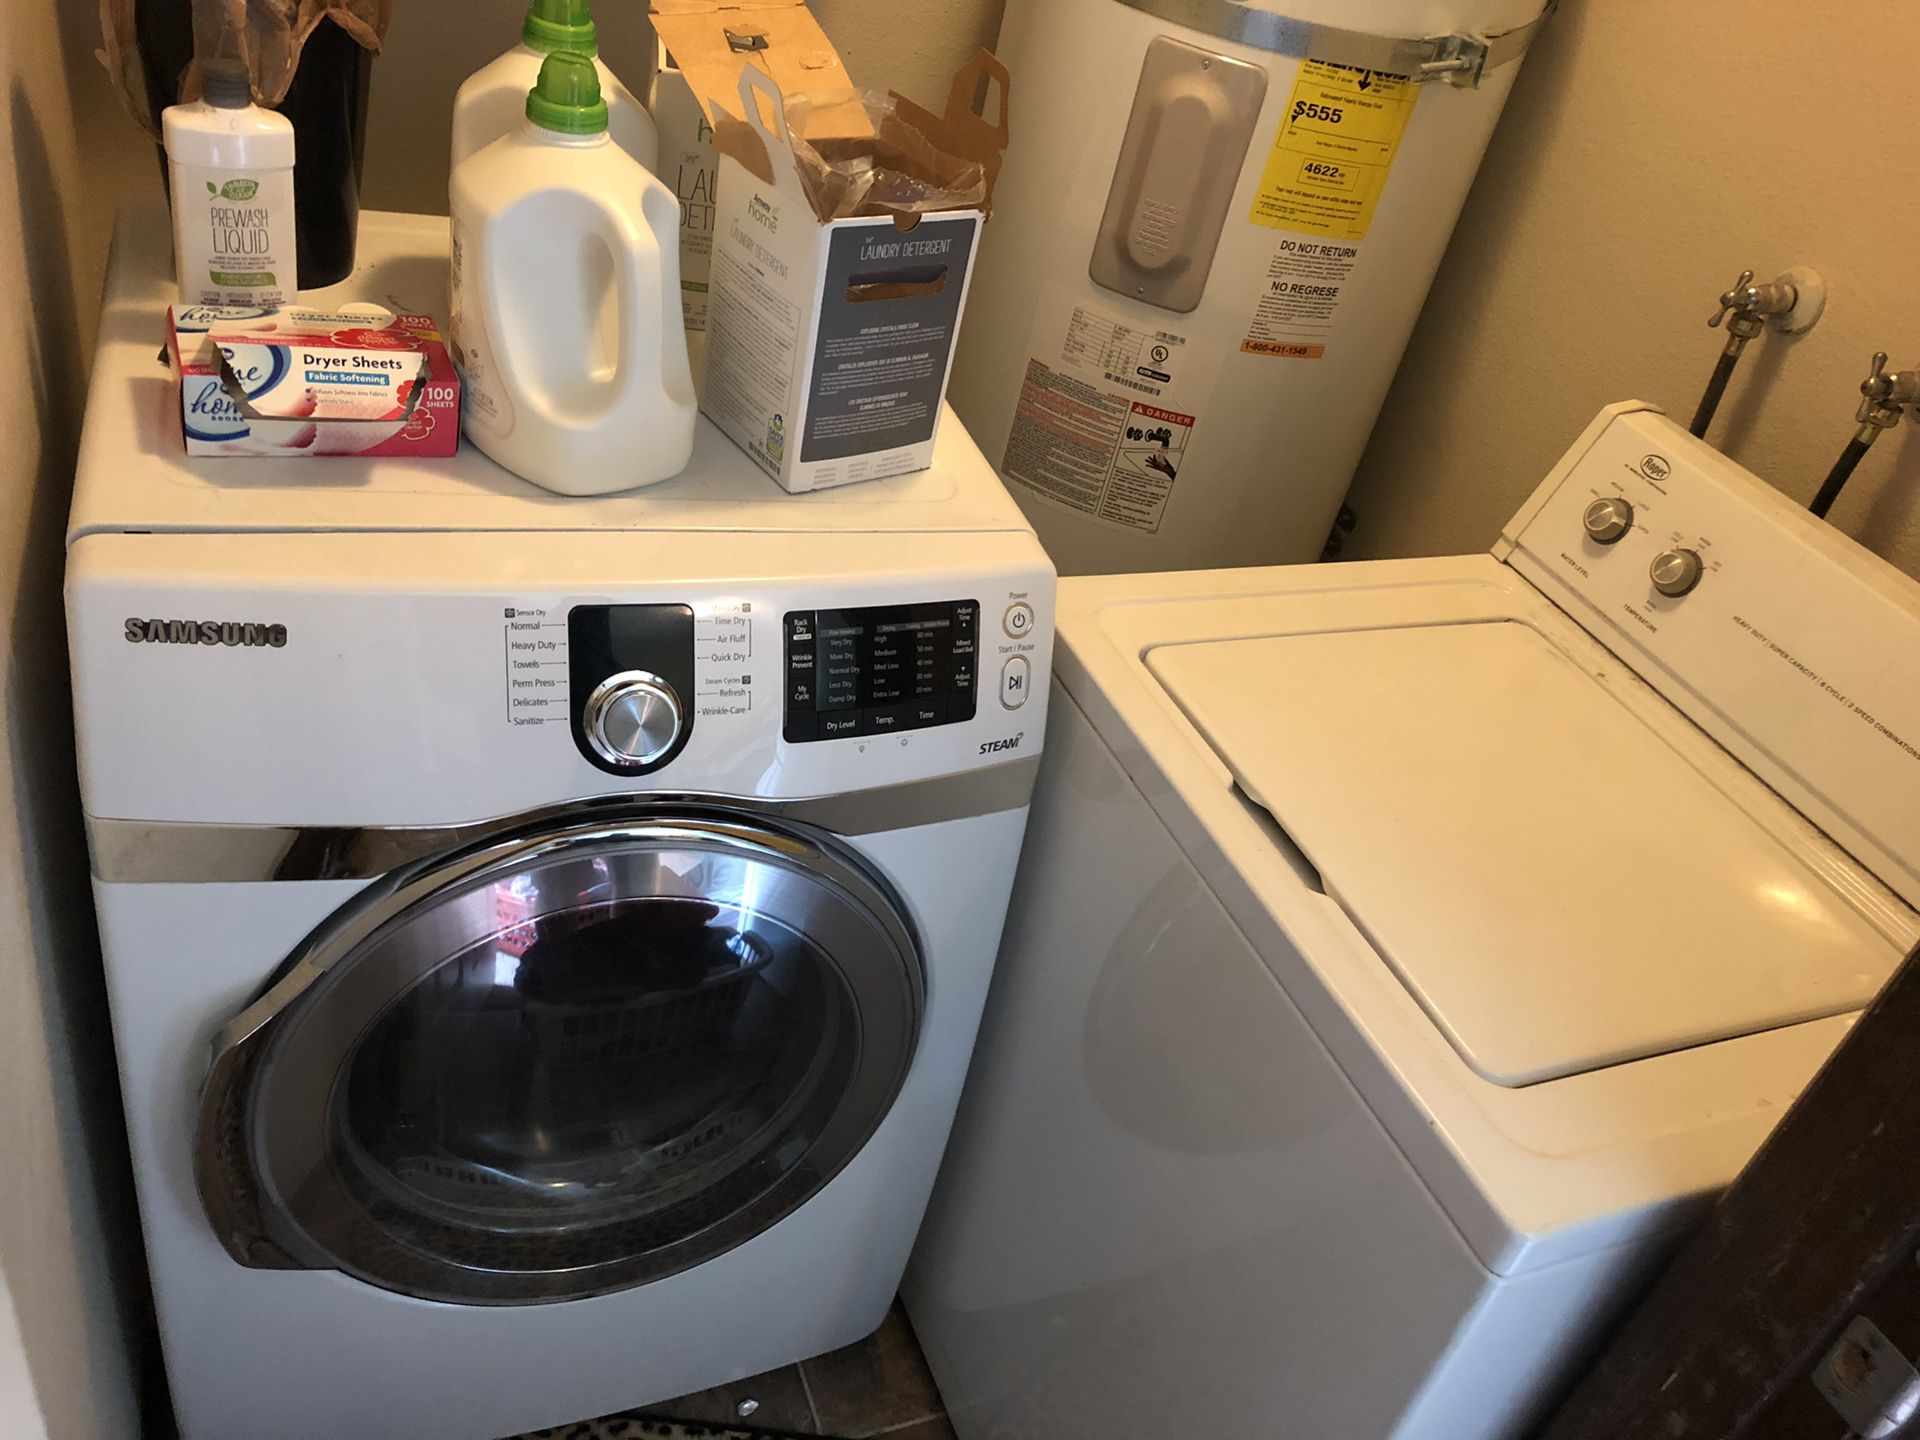 Washer (right)